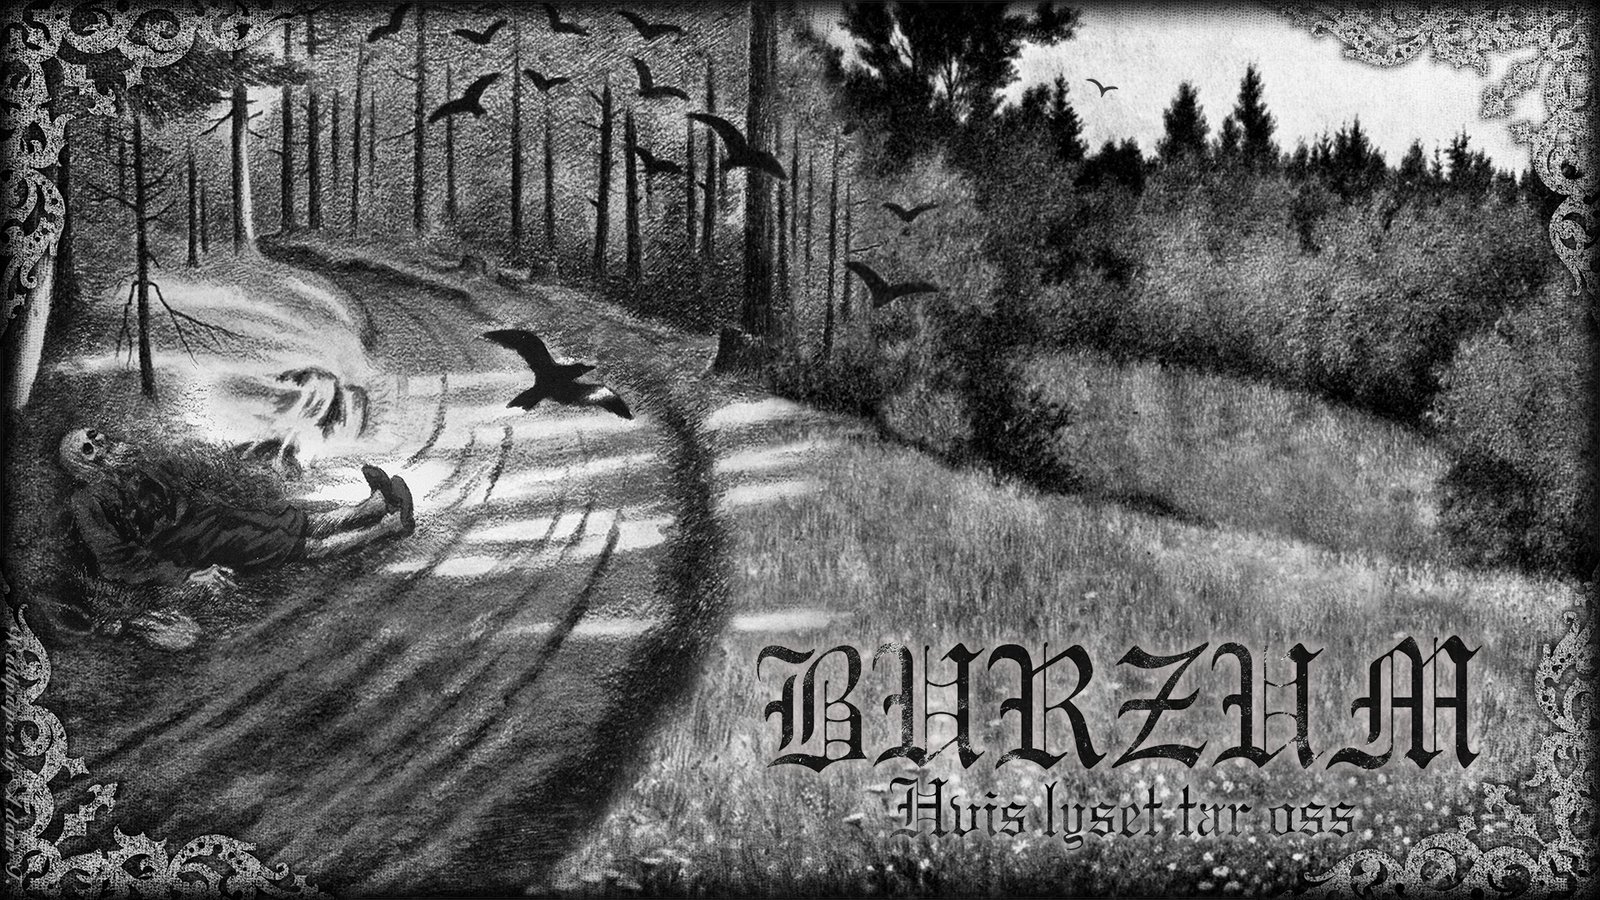 burzum meaning | Discover